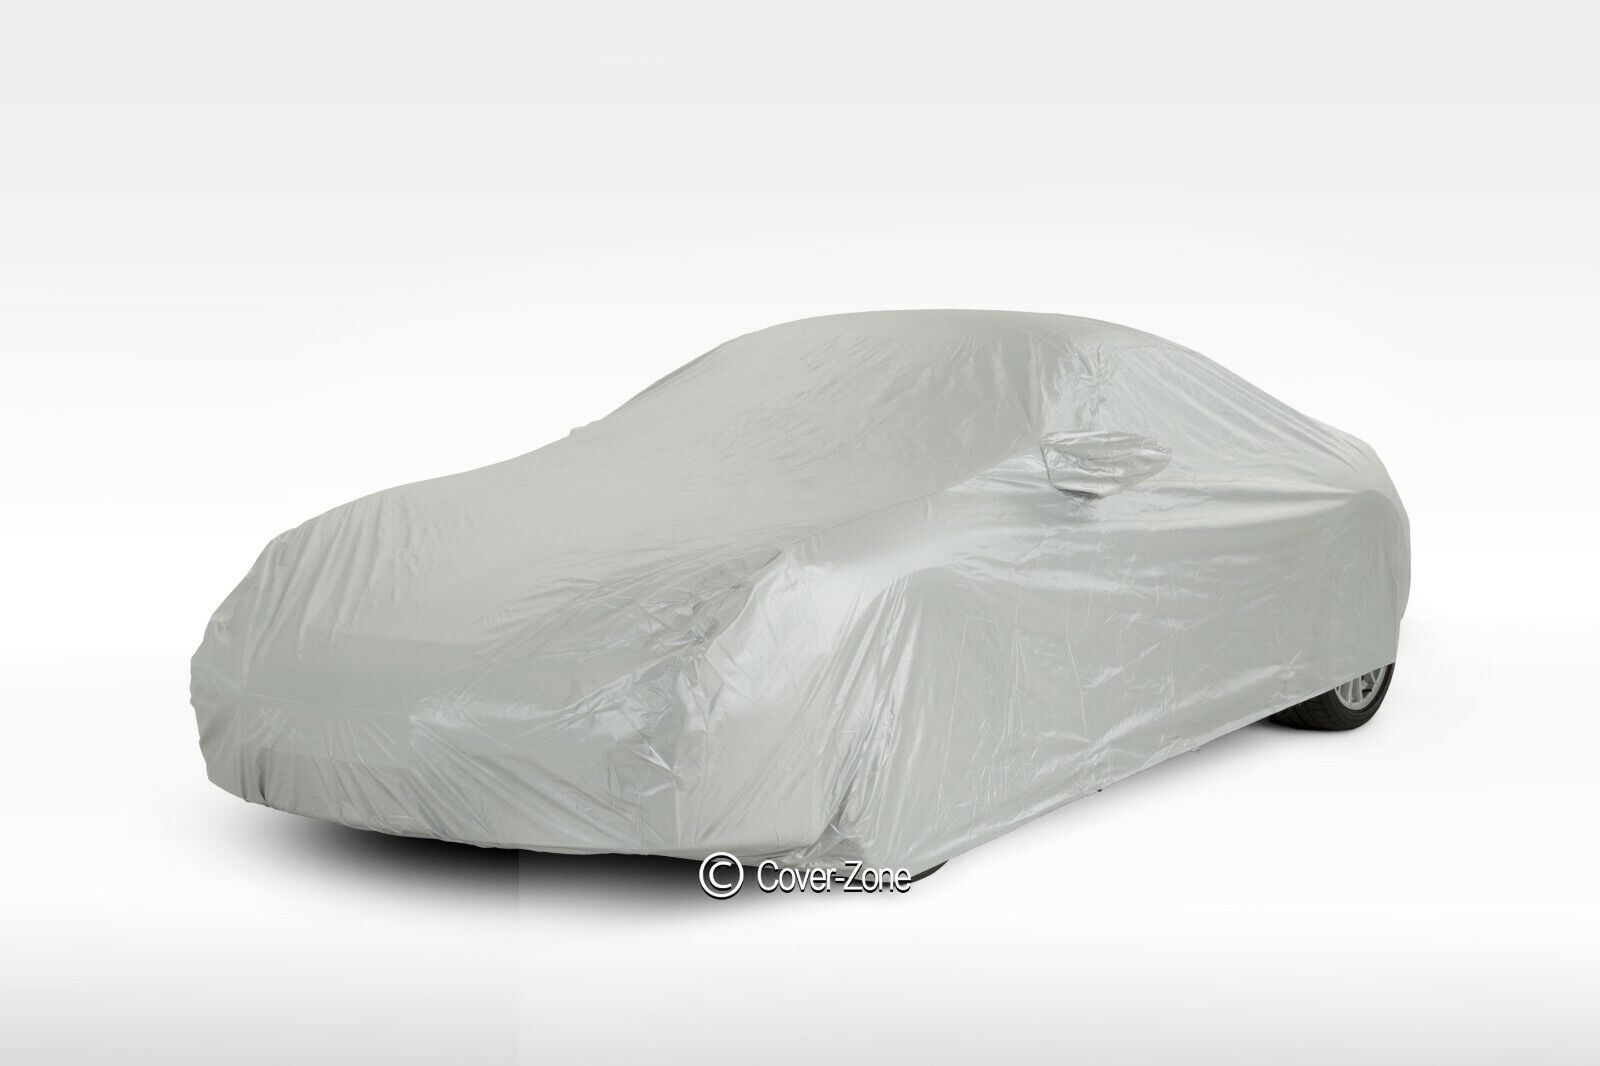 Coverzone Indoor/ Outdoor Car Cover (Suits Lotus Elise Mk1 & 2 1996-2011)